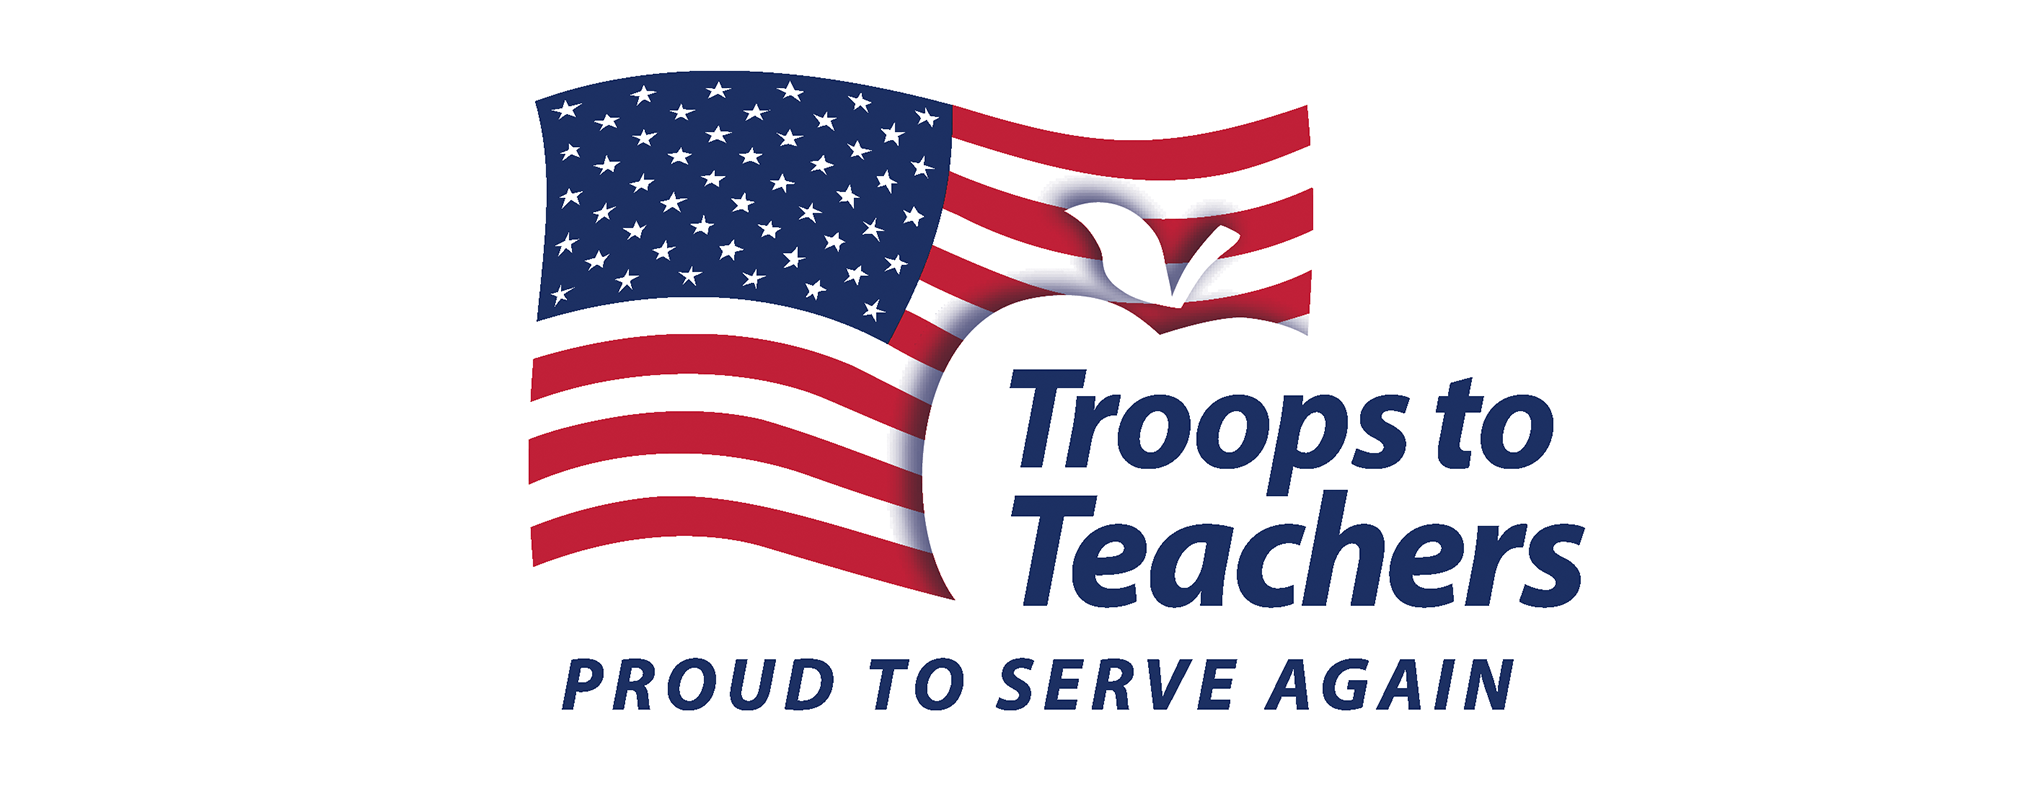 MSU Troops to Teachers regional program receives federal grant to reinstate services